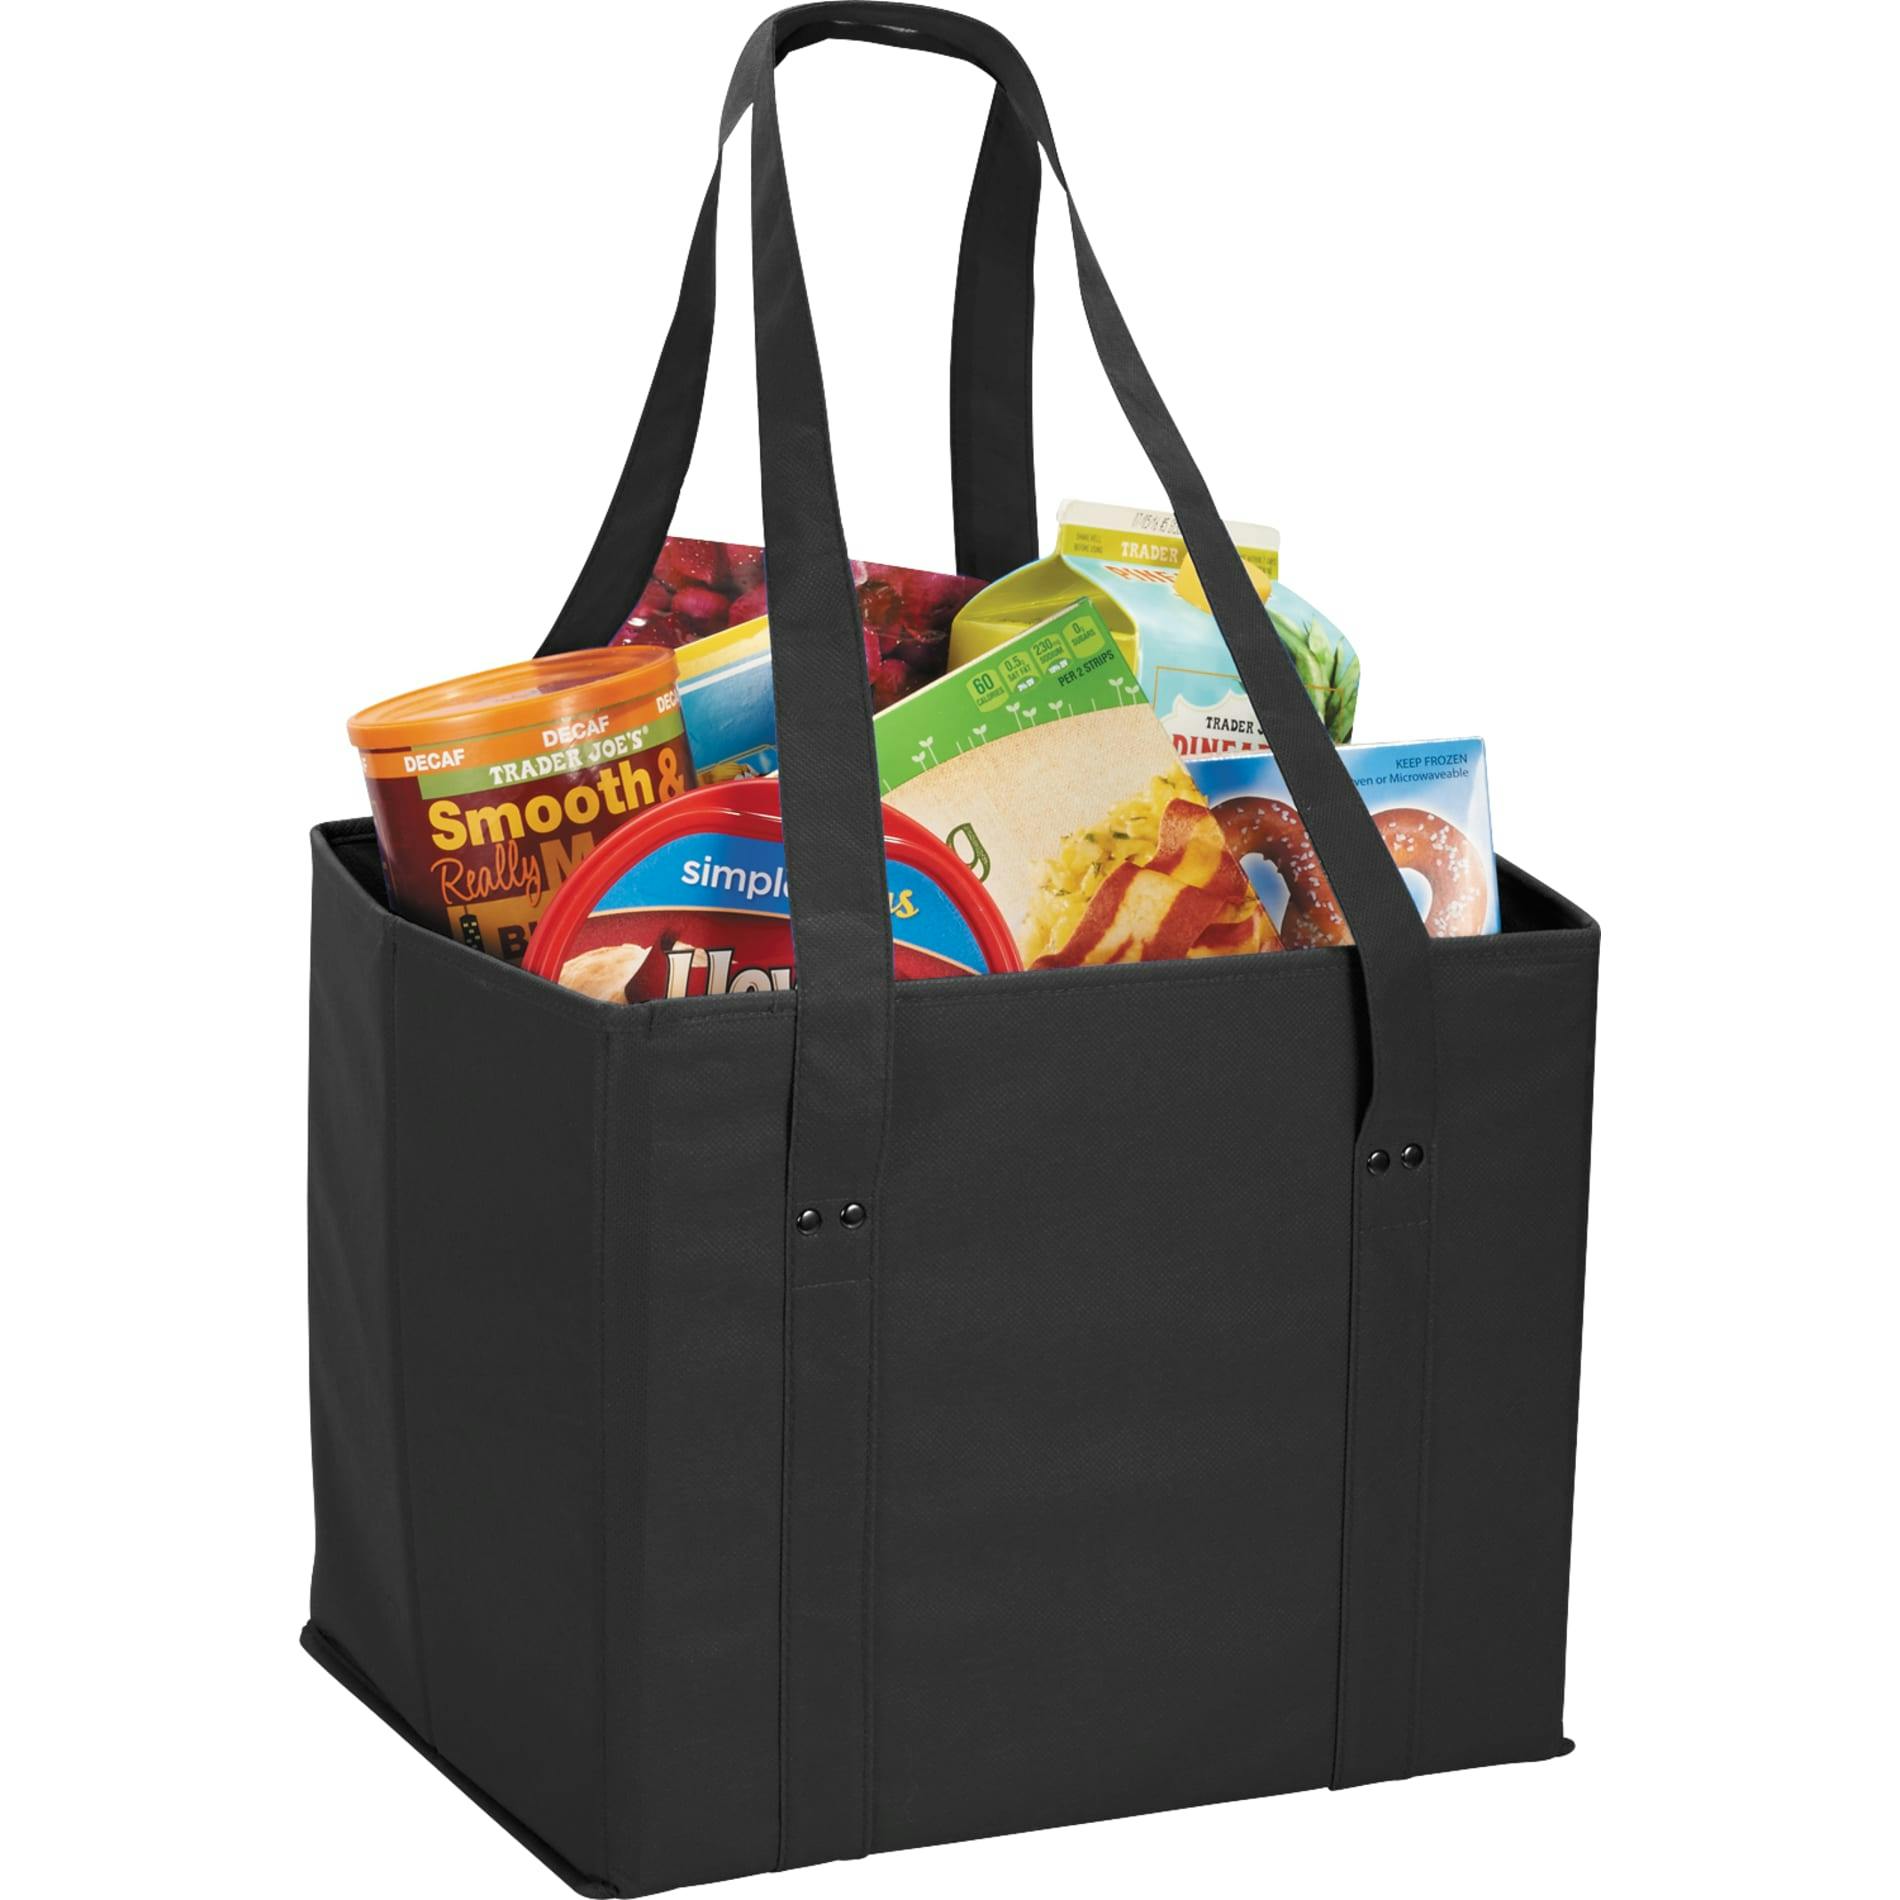 Collapsible Cube Storage Tote - additional Image 1